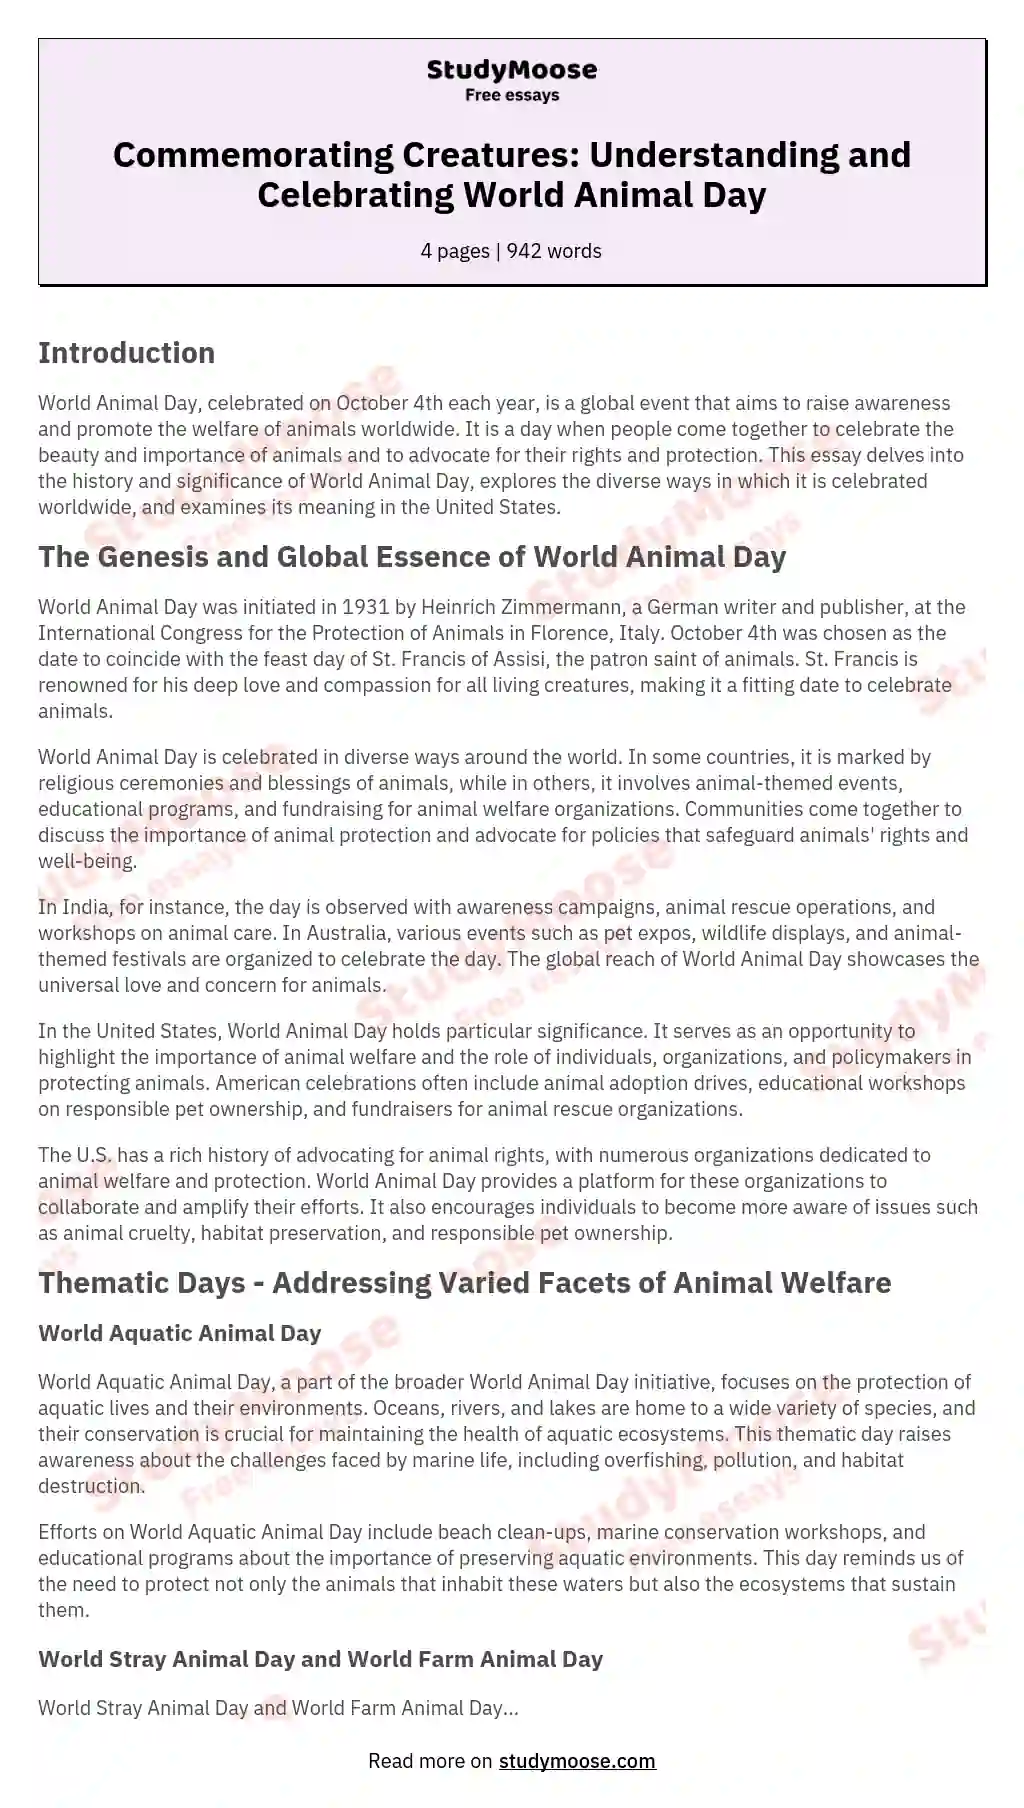 Commemorating Creatures: Understanding and Celebrating World Animal Day essay